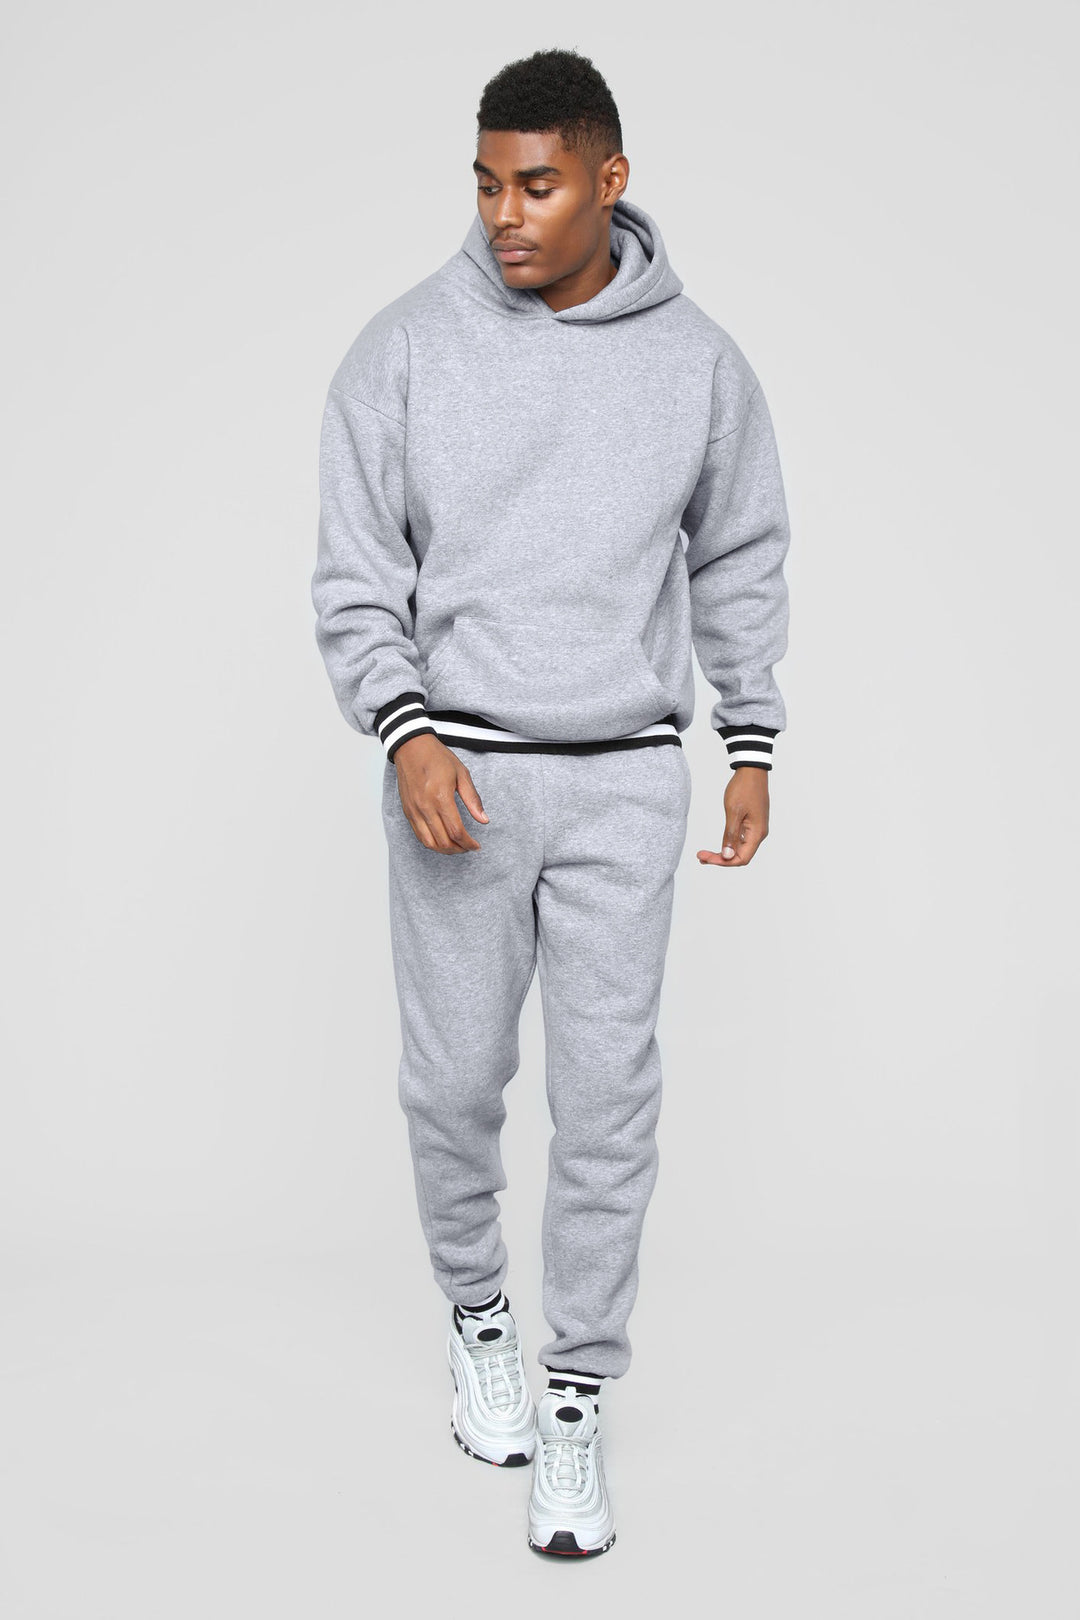 Custom Pullover High Set Blank Jogging Suits Men Sweatsuit With Pocket - Shaners Merchandise